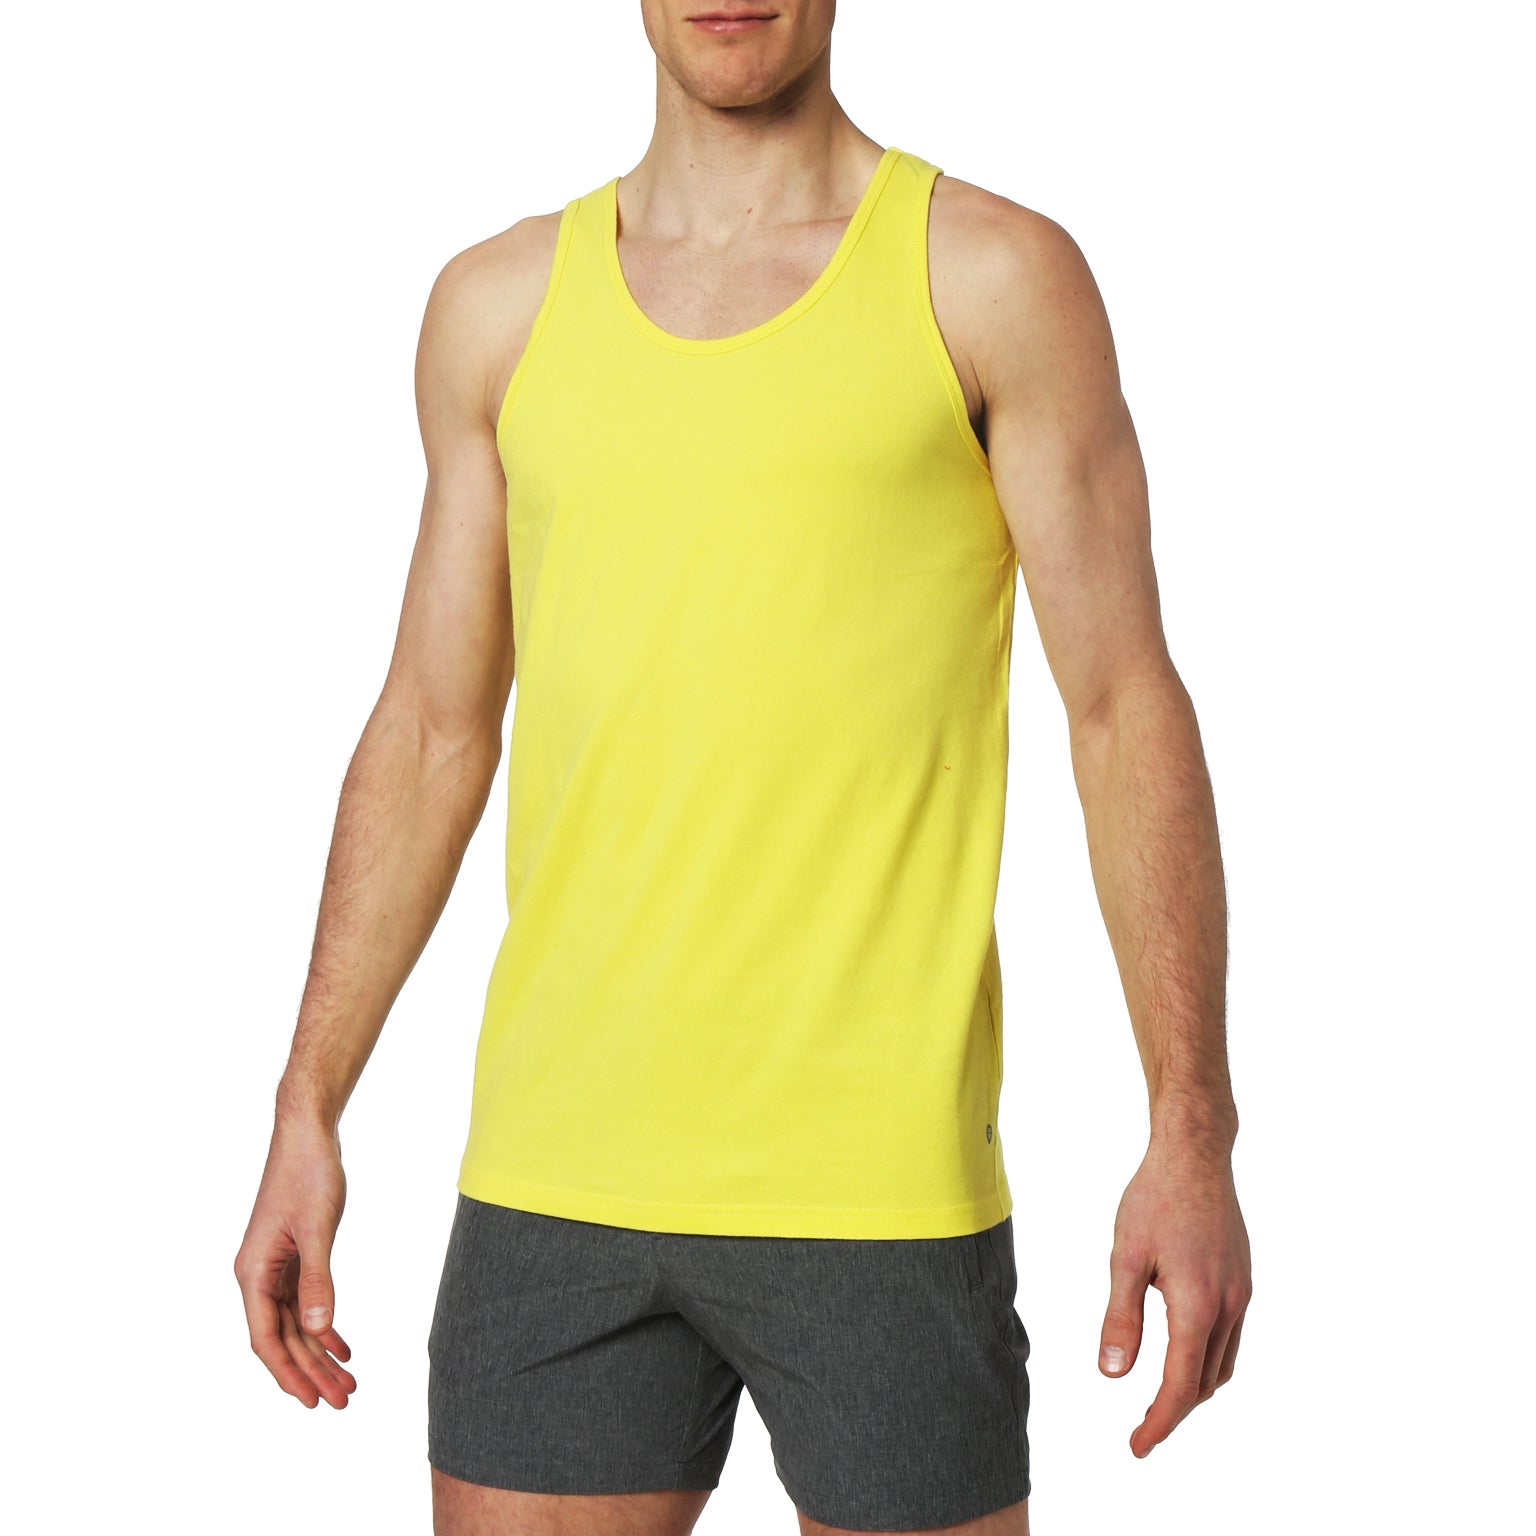 ACTIONWEAR- Canary Solid Essential Cotton Tank Top